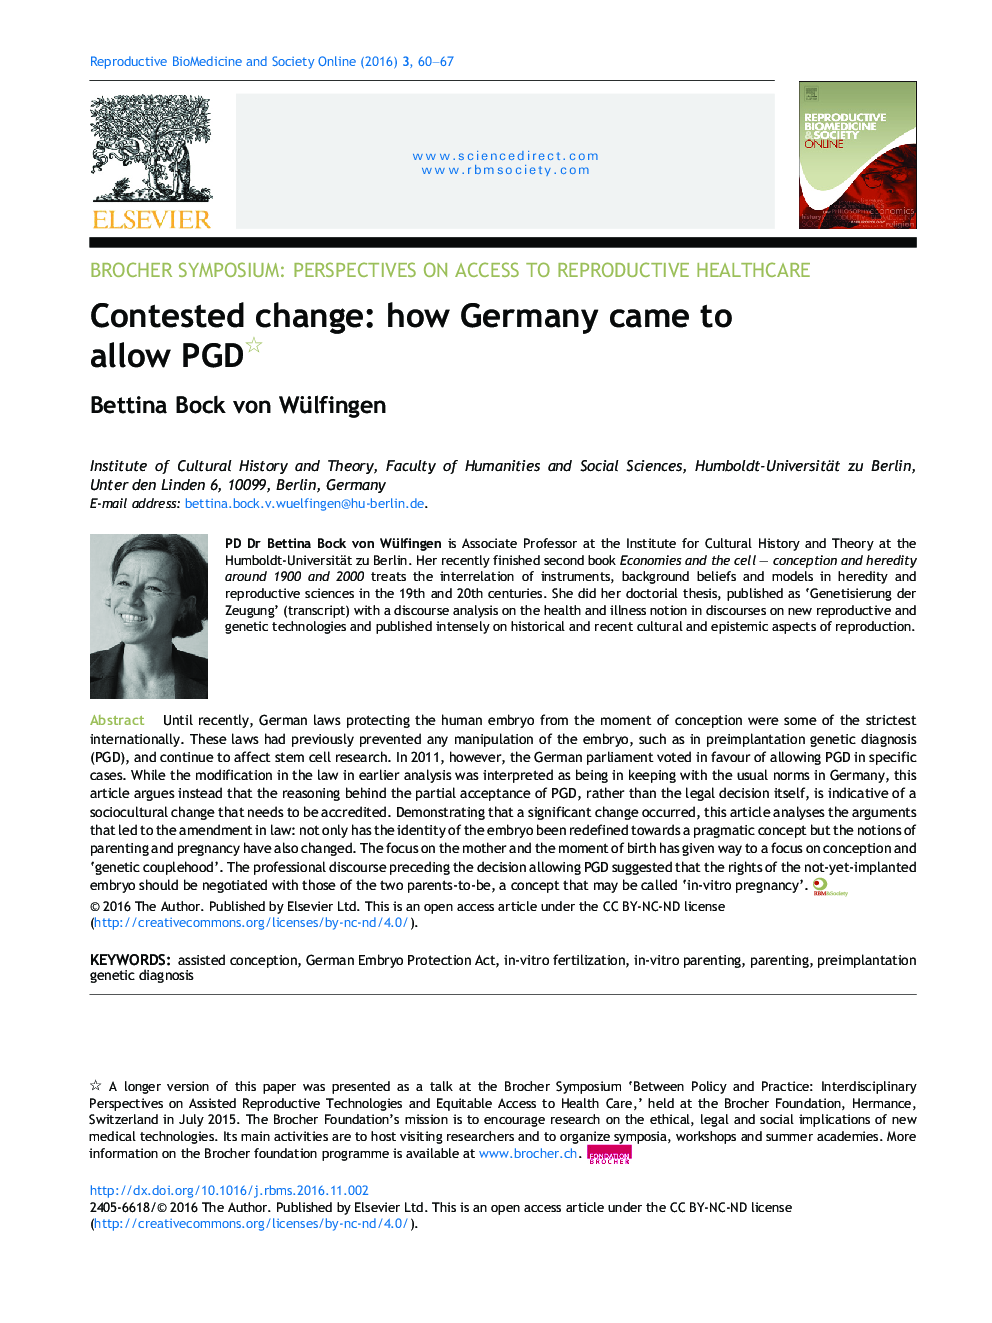 Contested change: how Germany came to allow PGD